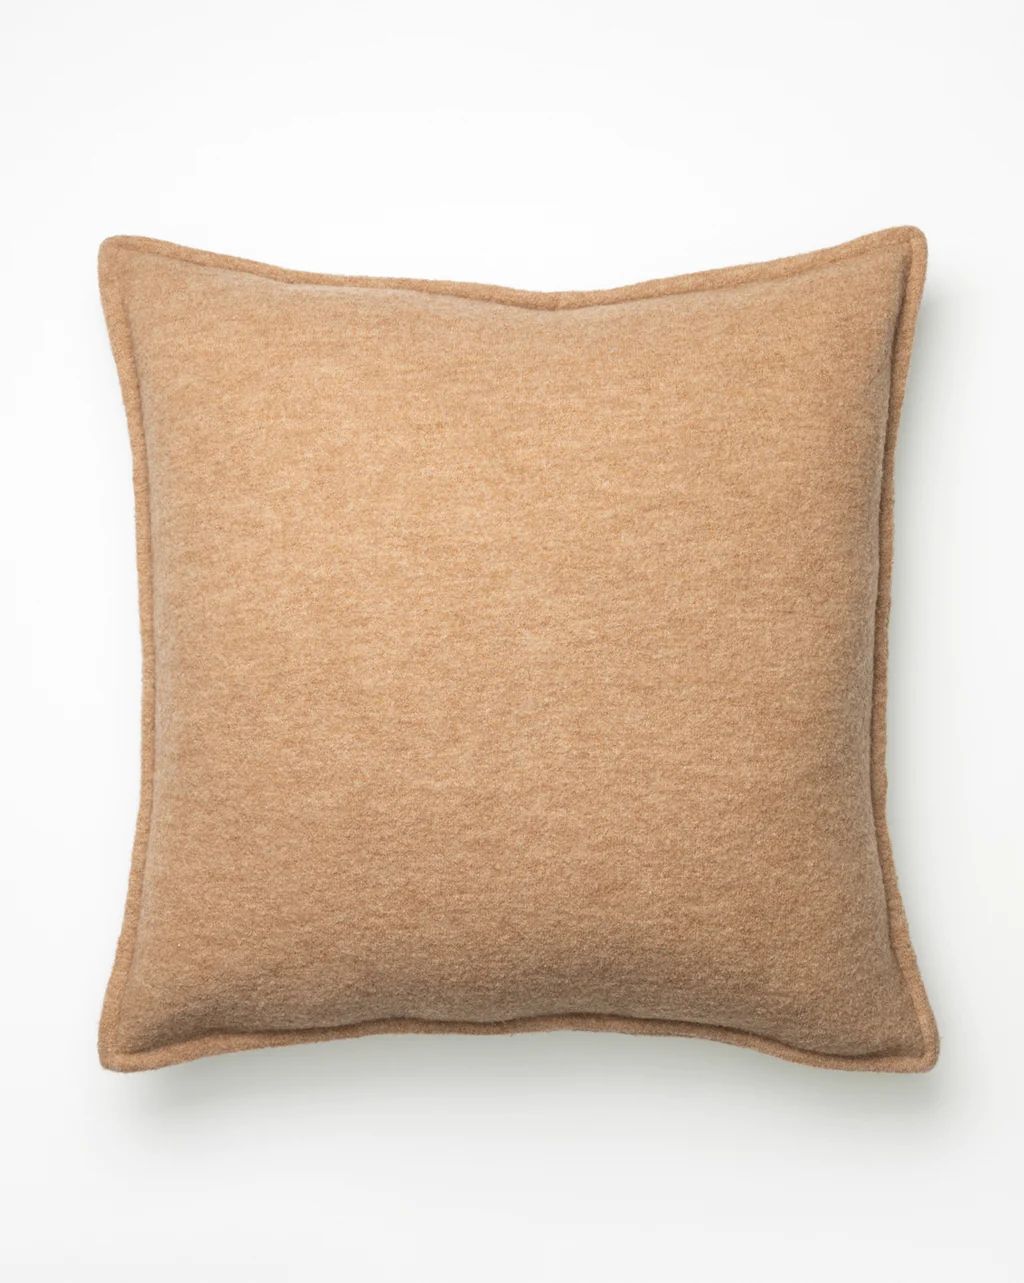 Neil Wool Pillow Cover | McGee & Co.